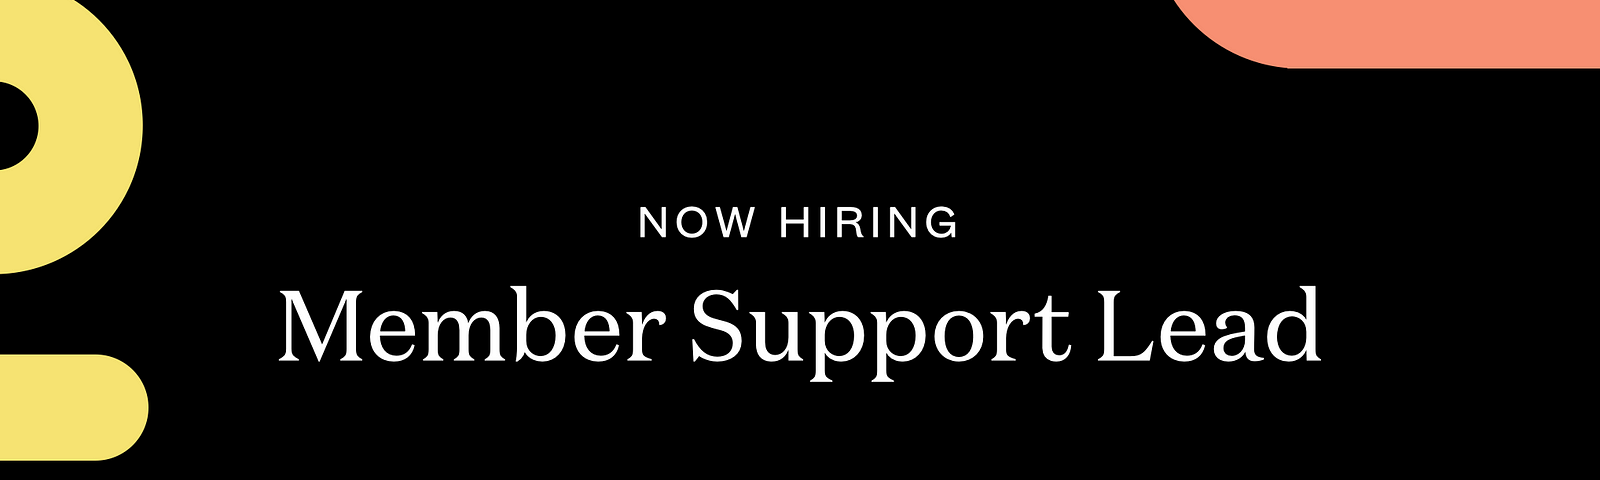 A black image with the text, “now hiring member support lead” and the Nostos logo